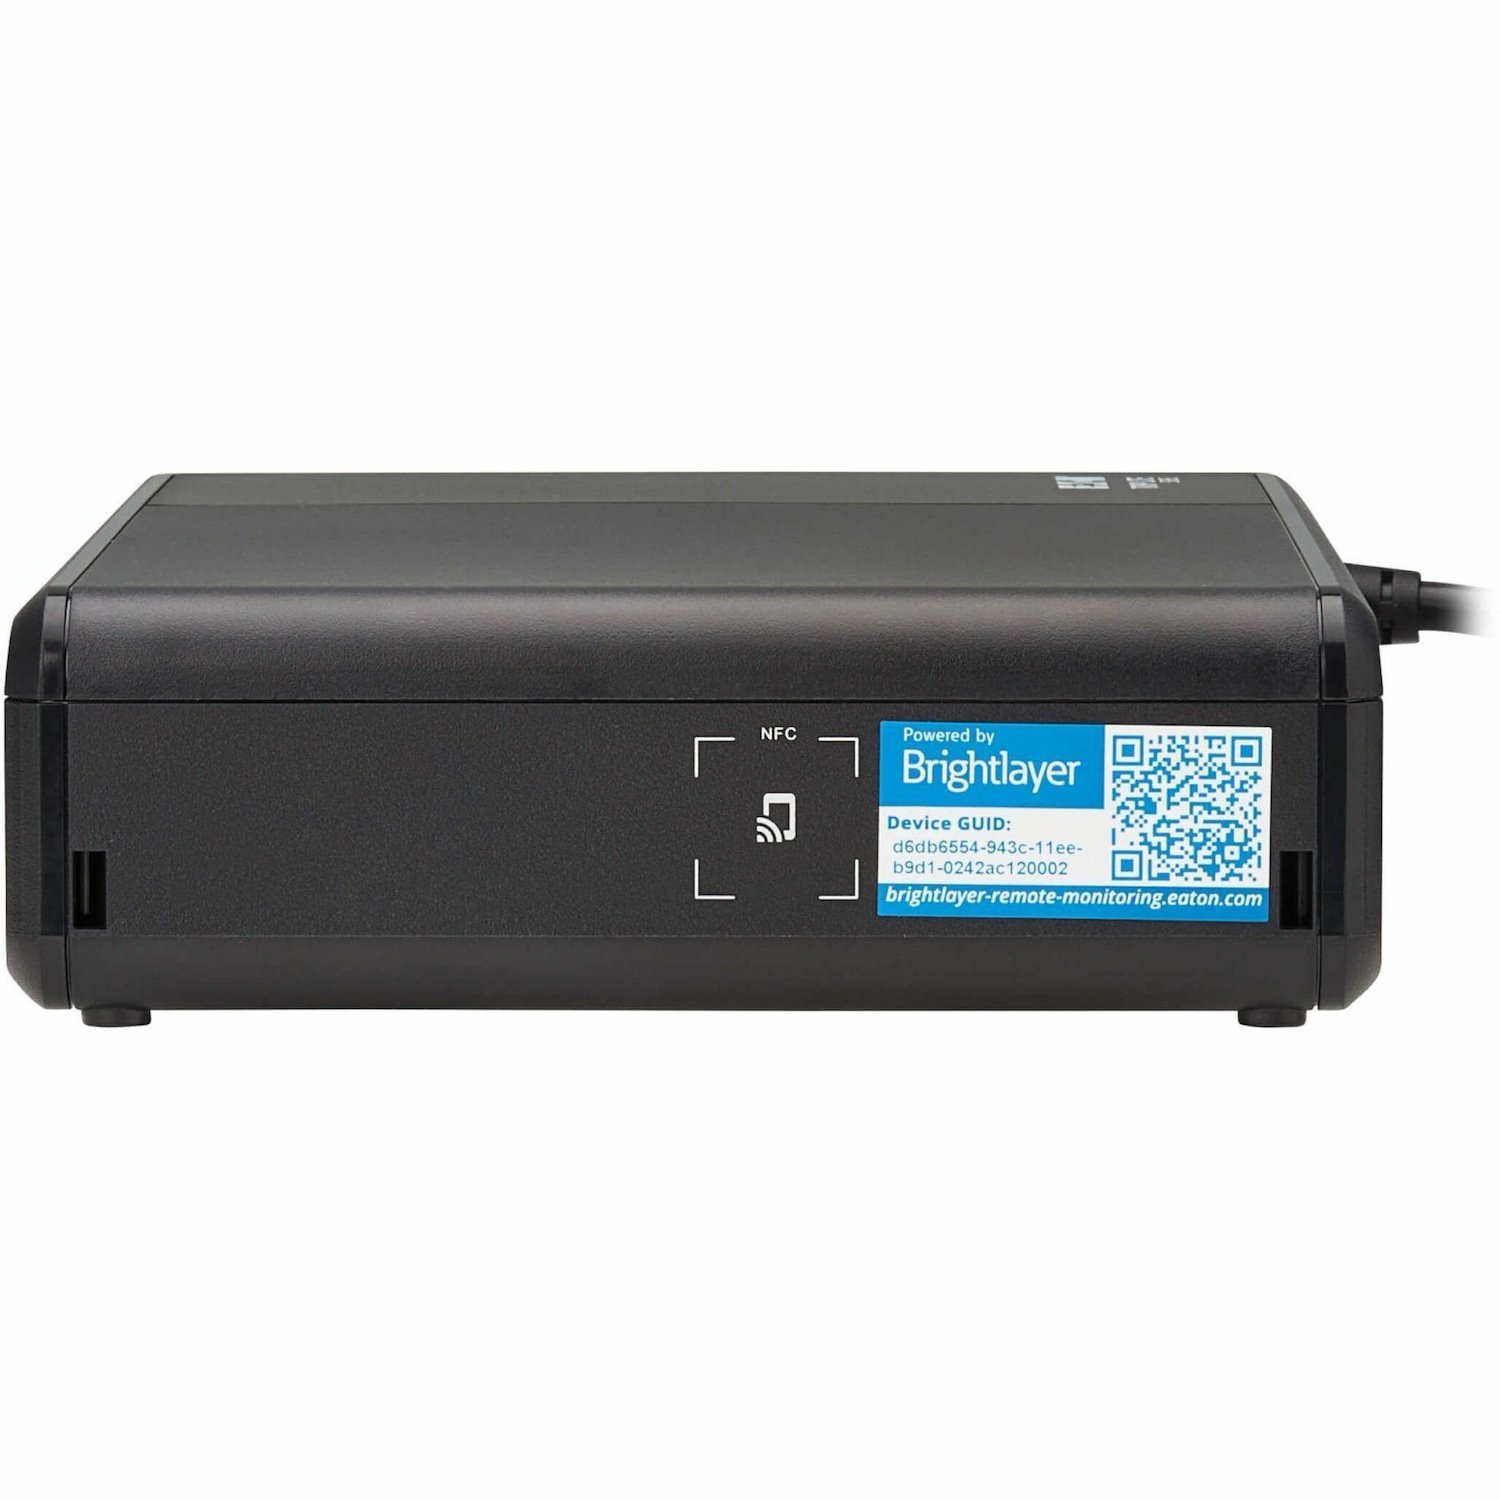 Eaton Tripp Lite Series 600VA 300W 120V Standby Cloud-Connected UPS with Remote Monitoring 4 NEMA 5-15R Battery Backup